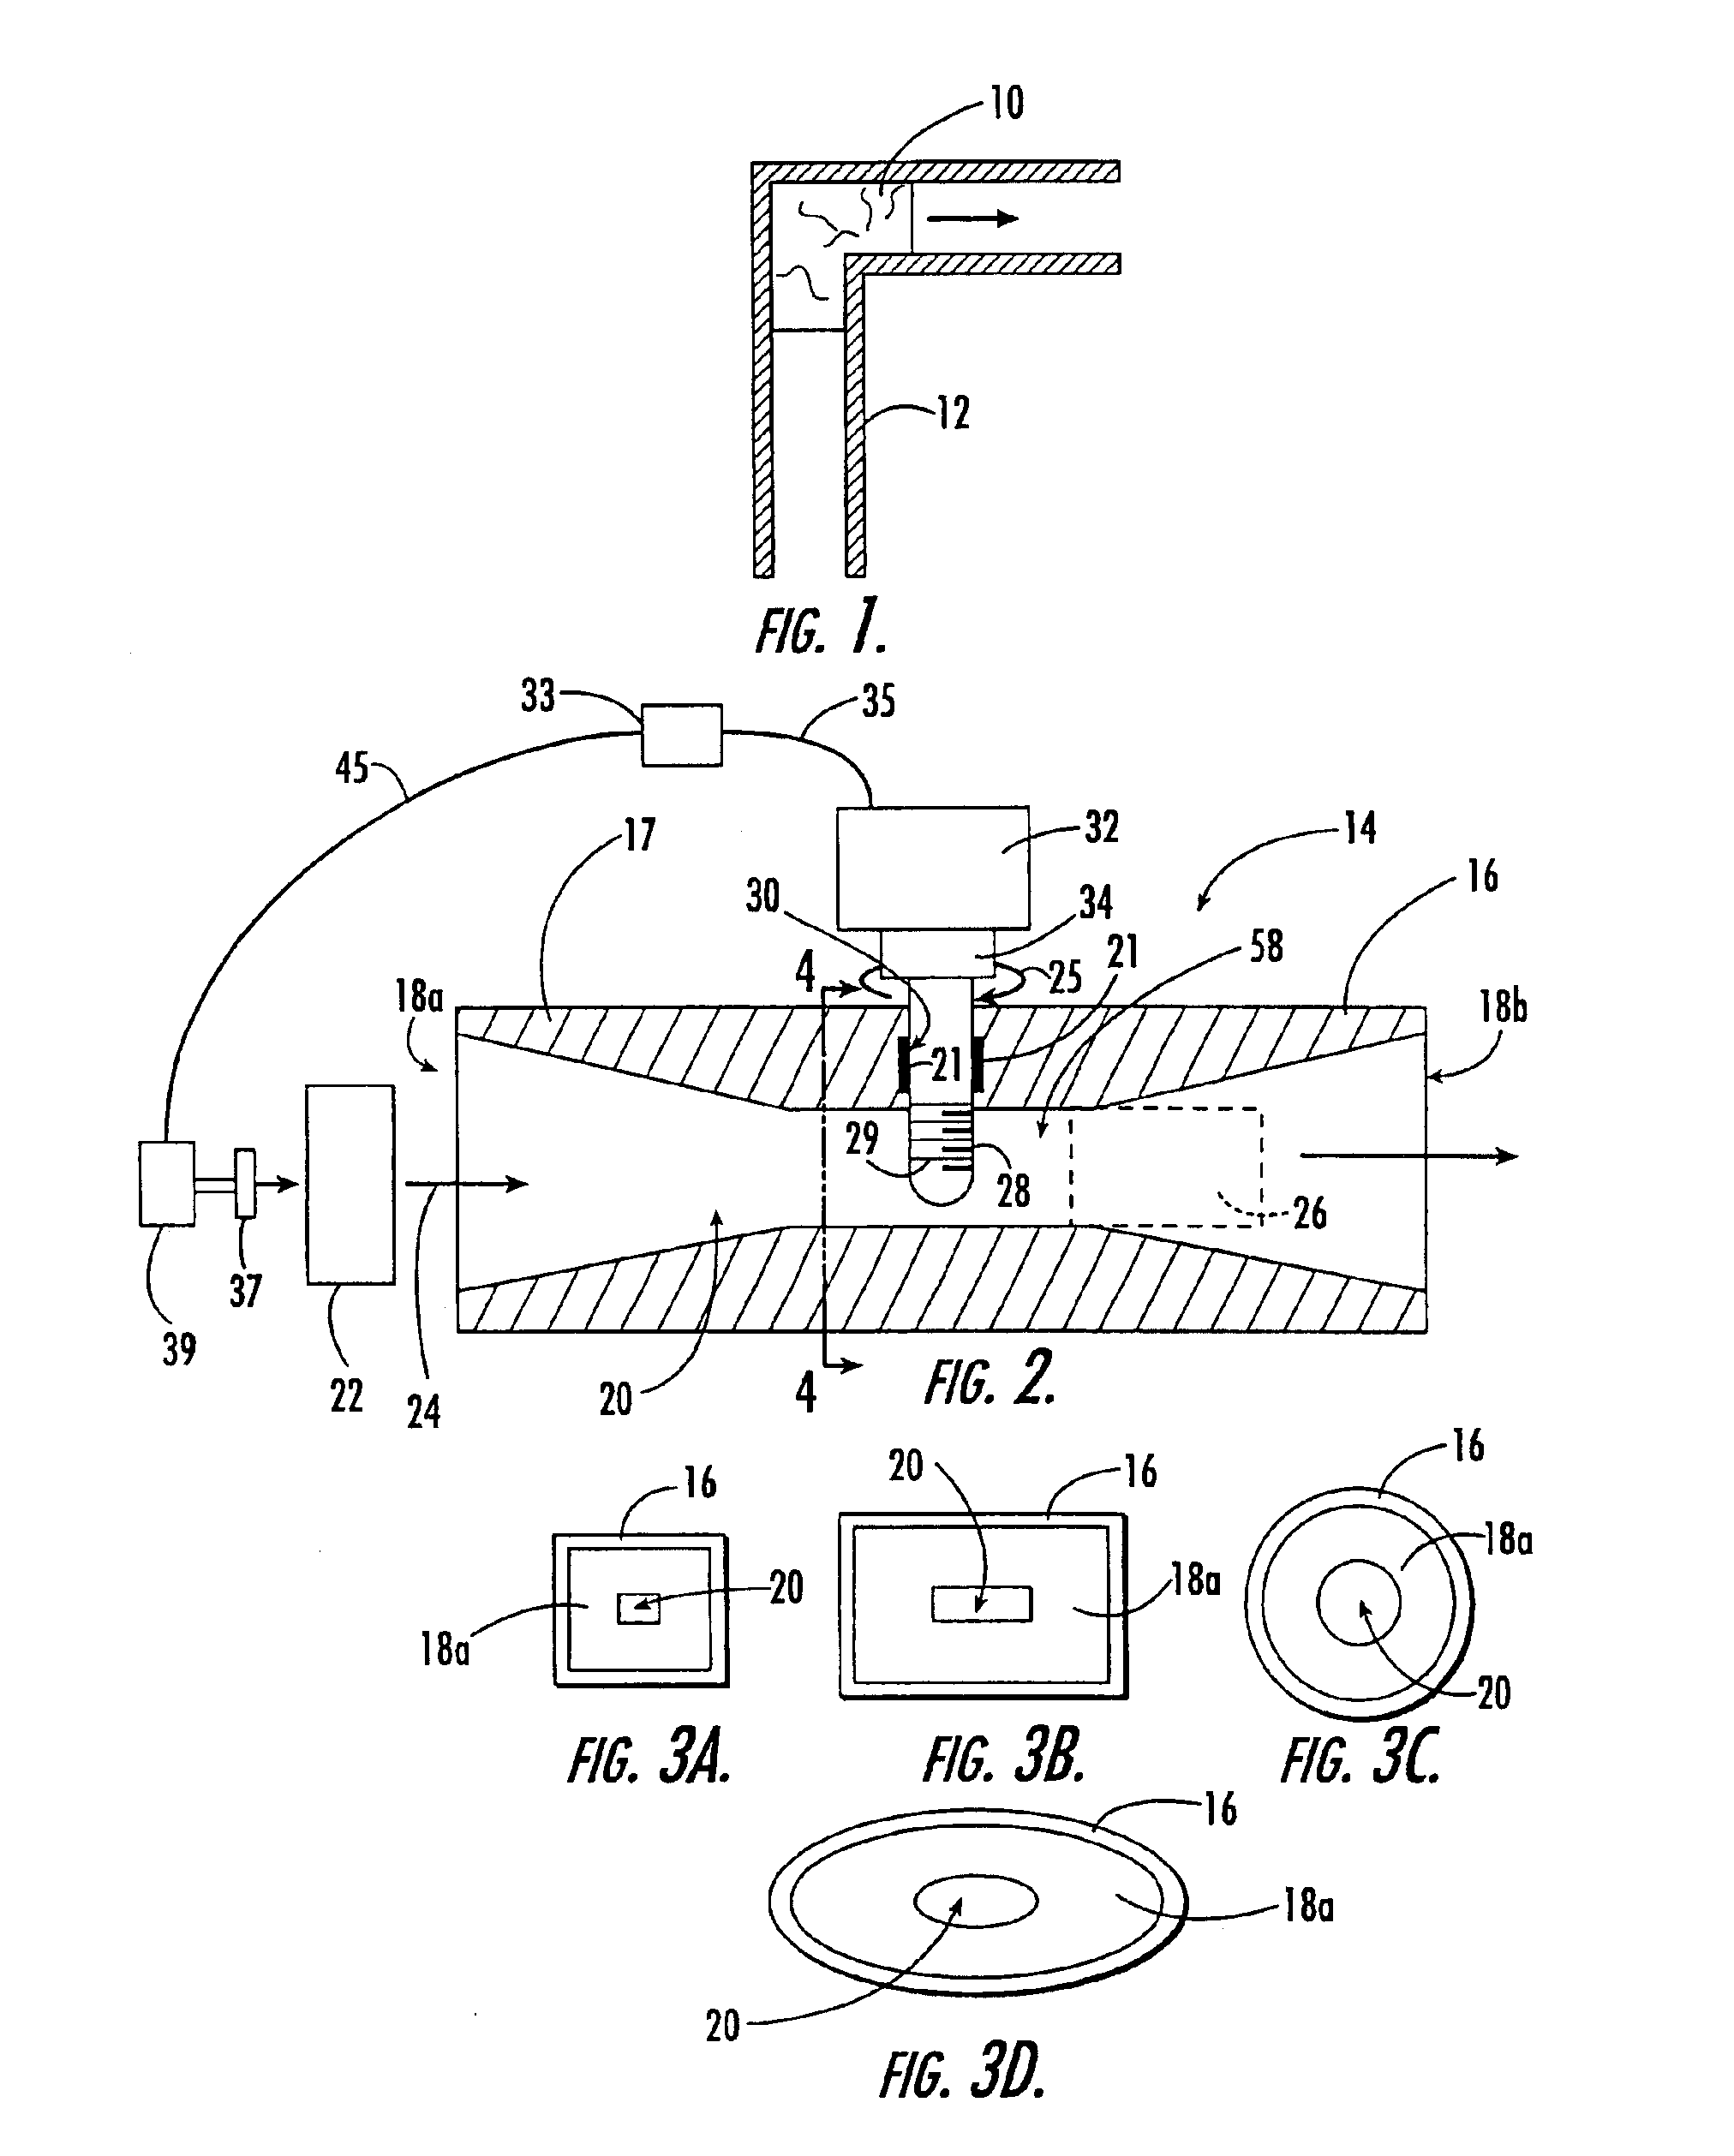 Method and apparatus for producing a refined grain structure